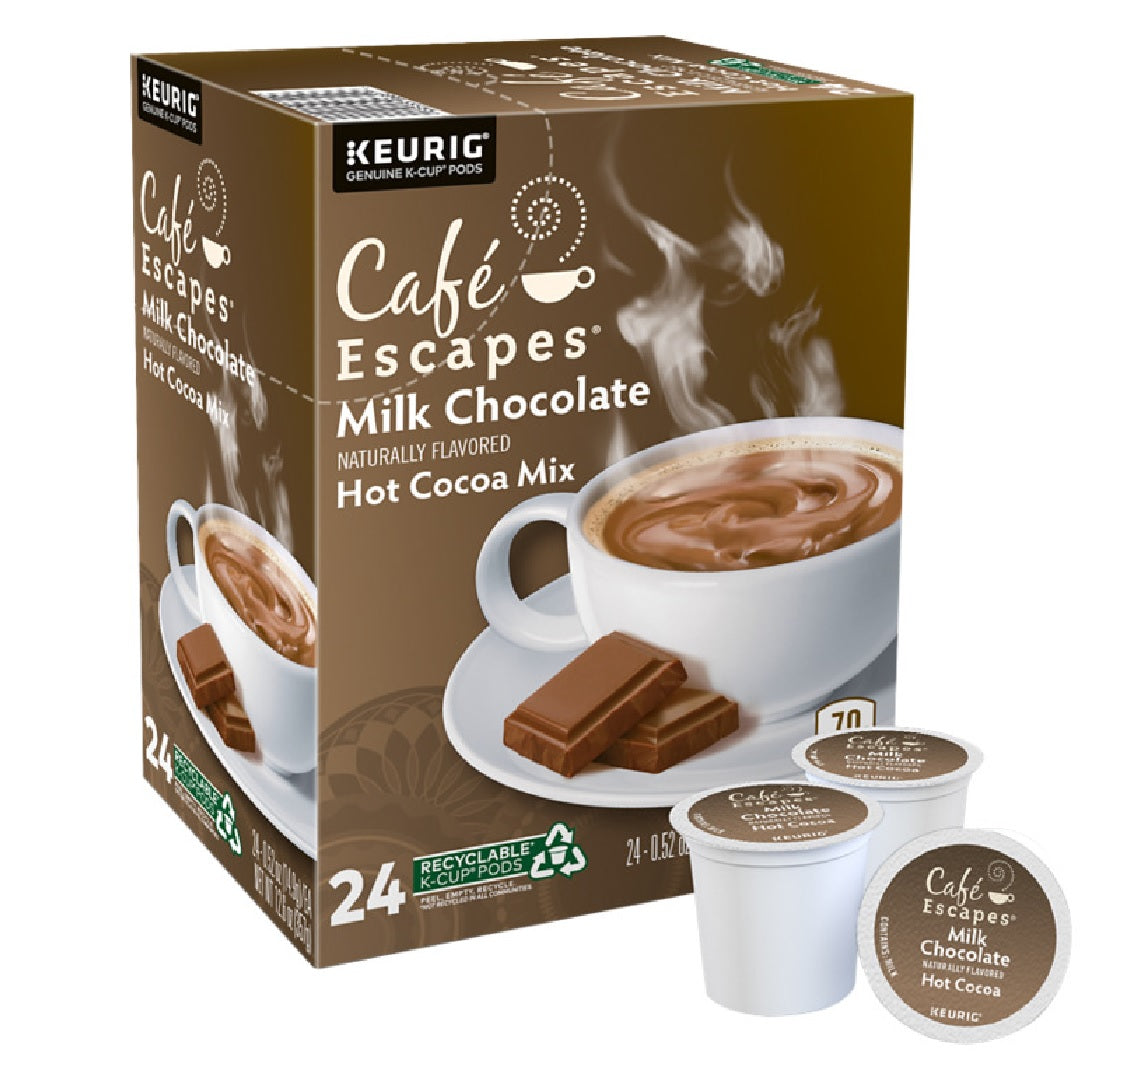 Keurig 5000330121 Starbucks Cocoa and Toffee Coffee K-Cups, 24 Pack